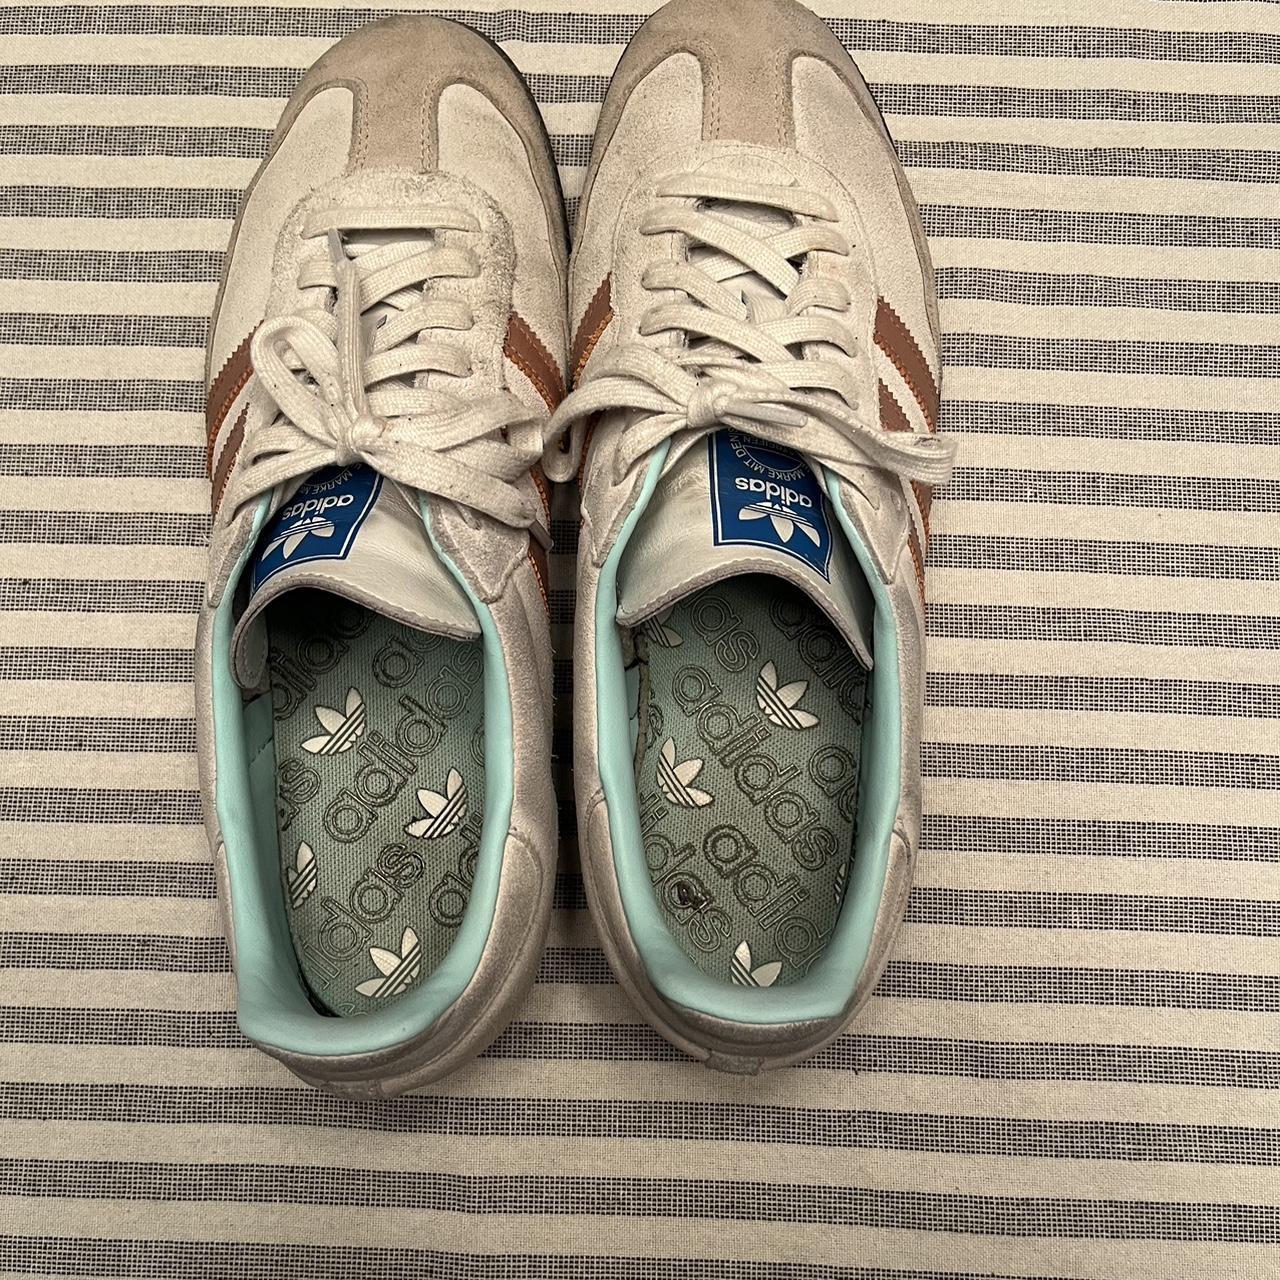 Adidas Men's Cream and Blue Trainers (3)